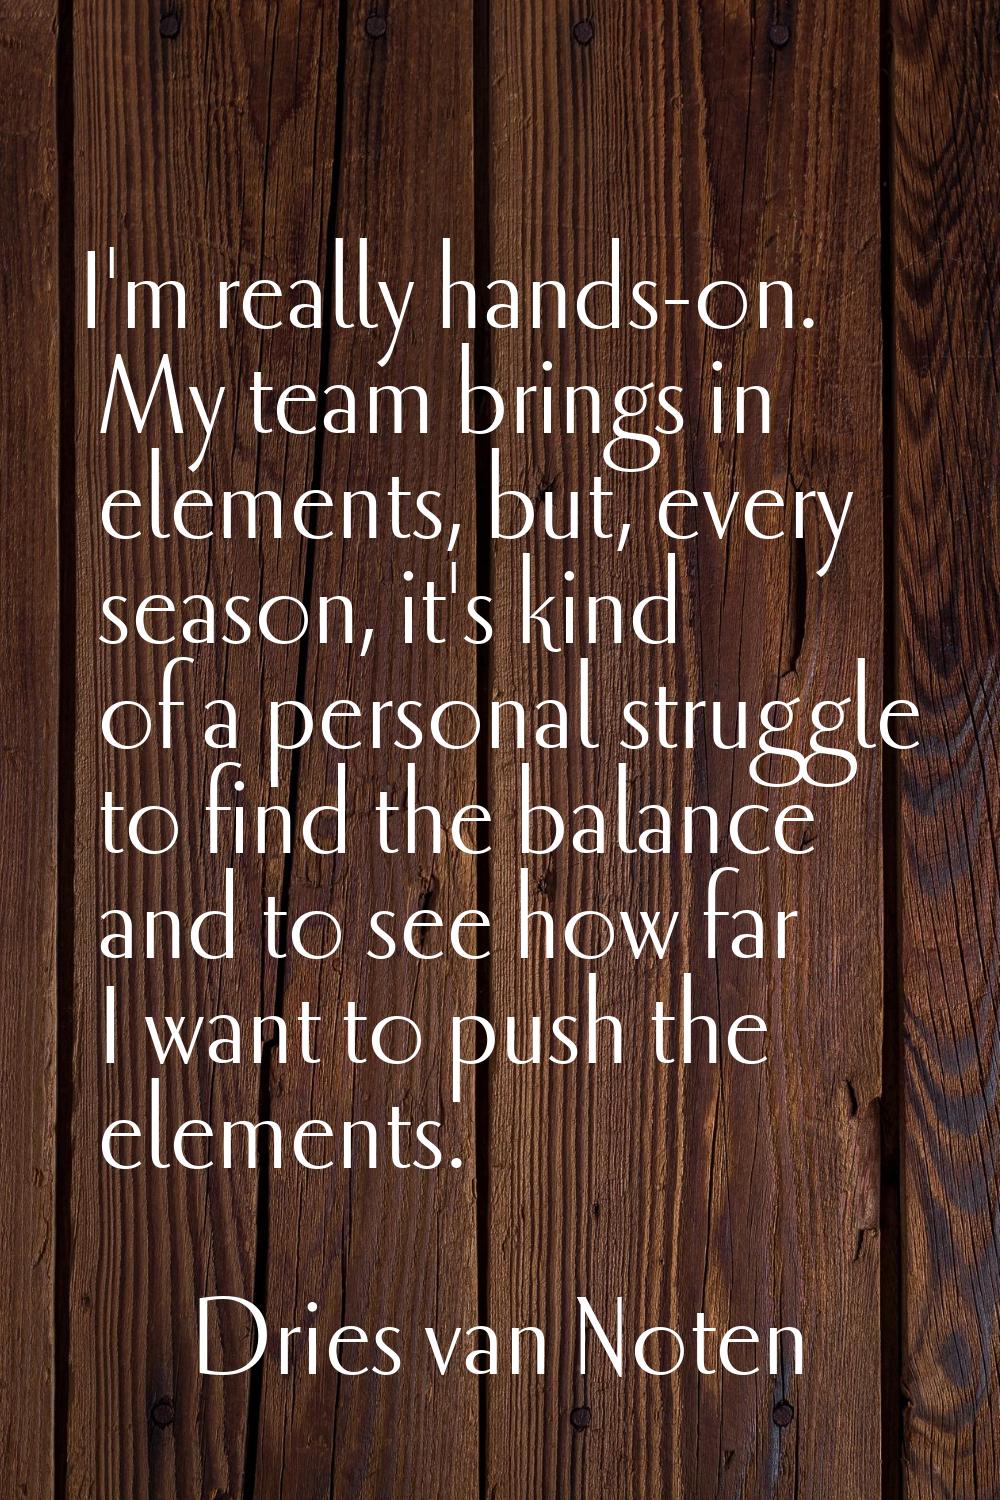 I'm really hands-on. My team brings in elements, but, every season, it's kind of a personal struggl